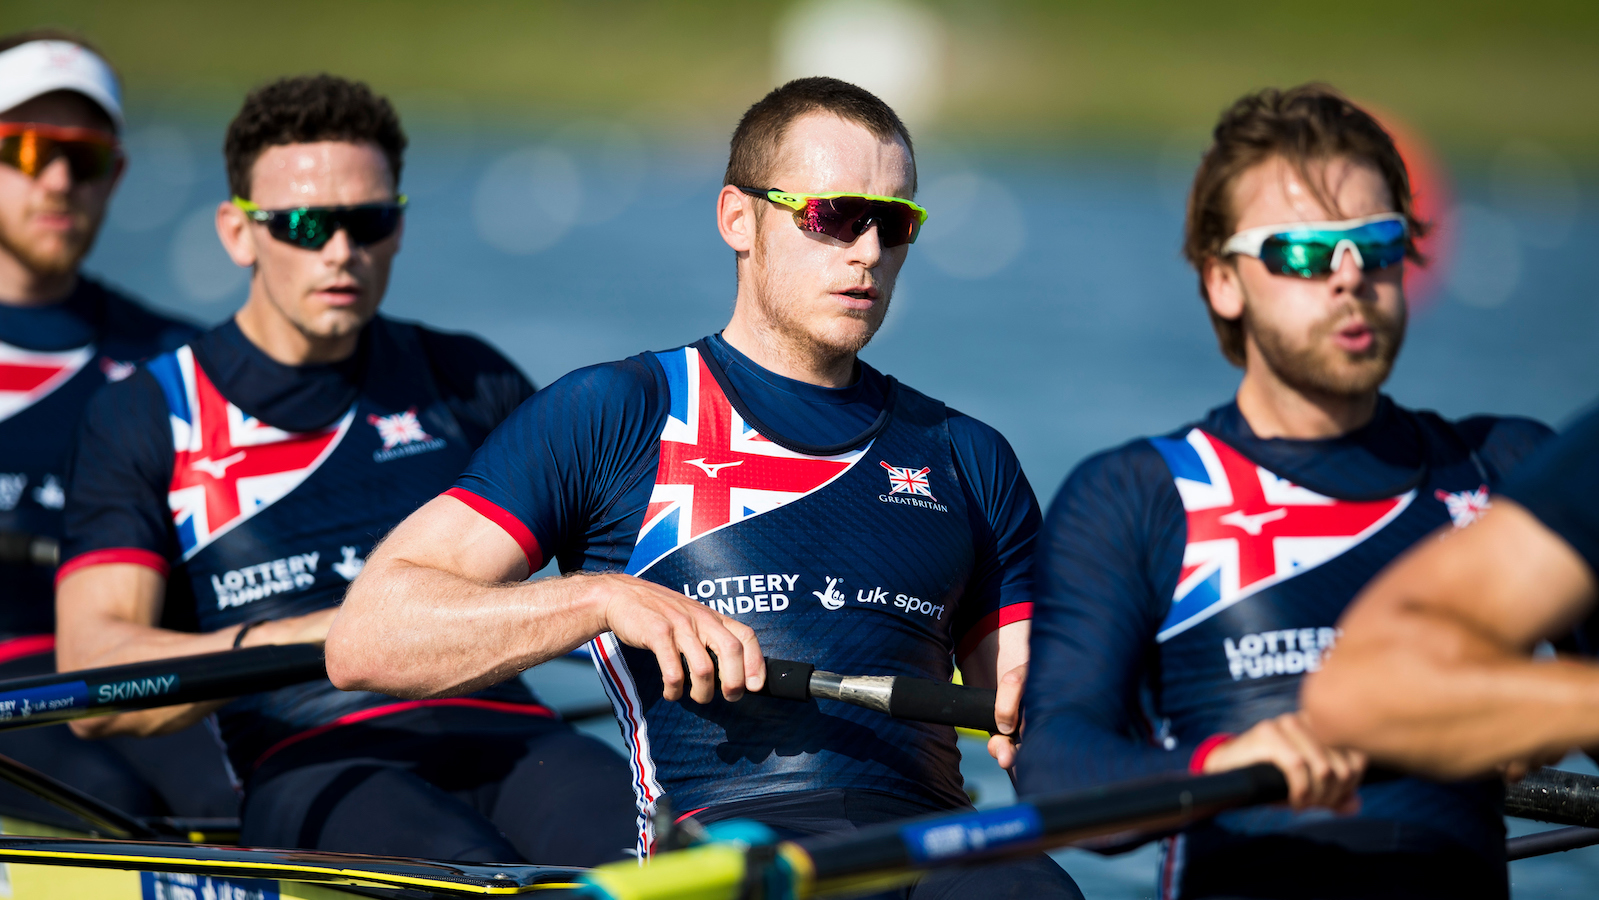 British Rowing The National Governing Body for Rowing